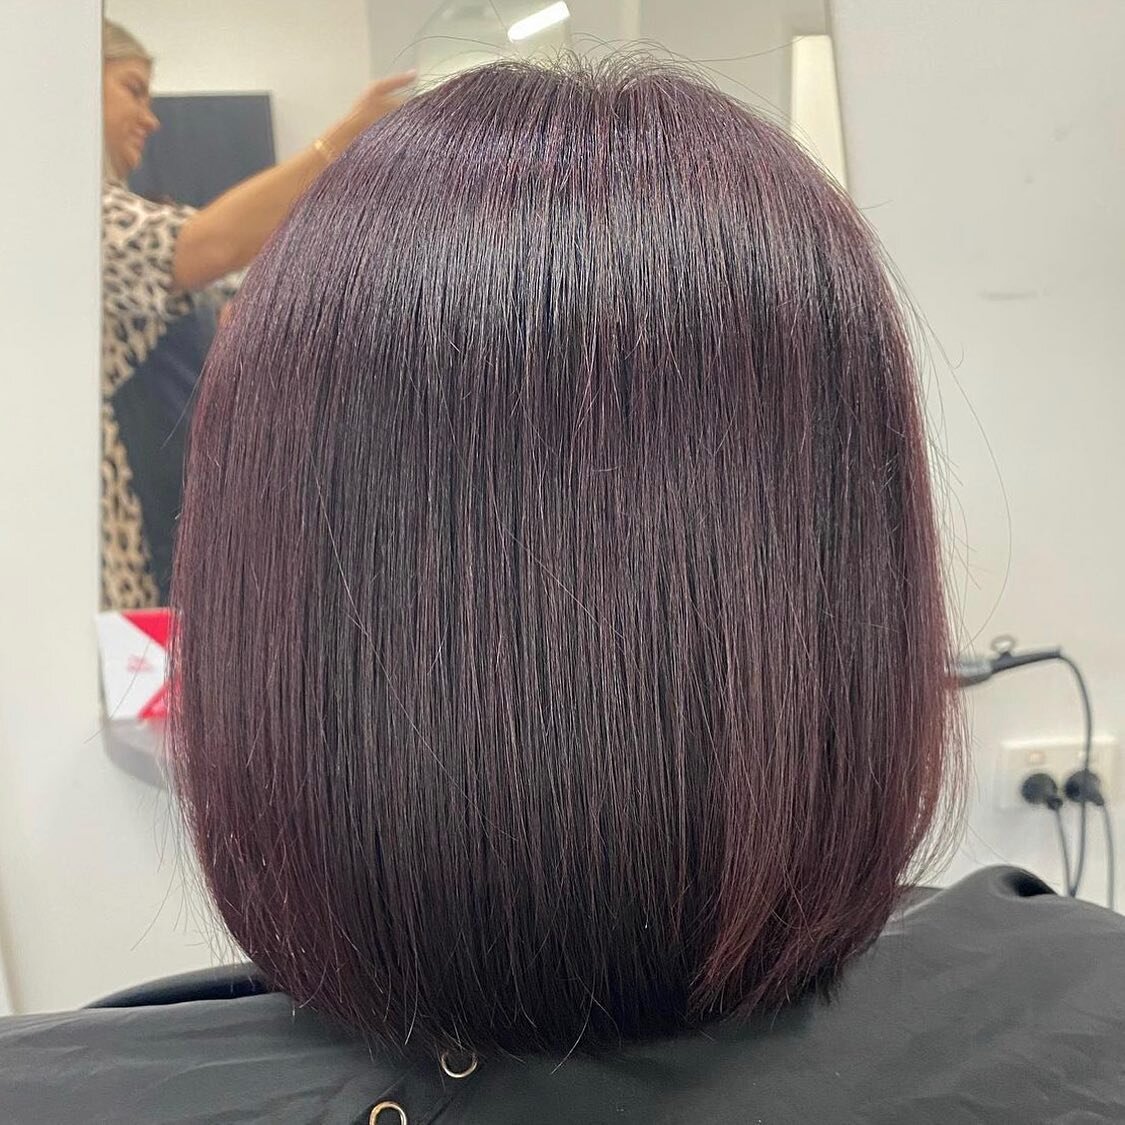 Swipe to see the stunning dimensions of this colour👉🏼👉🏼👉🏼

A colour of sophistication and subtle glamour, our client is absolutely killing it in this gorgeous tone! ✨

Hair by @justineflanagan_hair 

.
.
.

#AnnandaleHairDesign #Hair #Salon #Ha